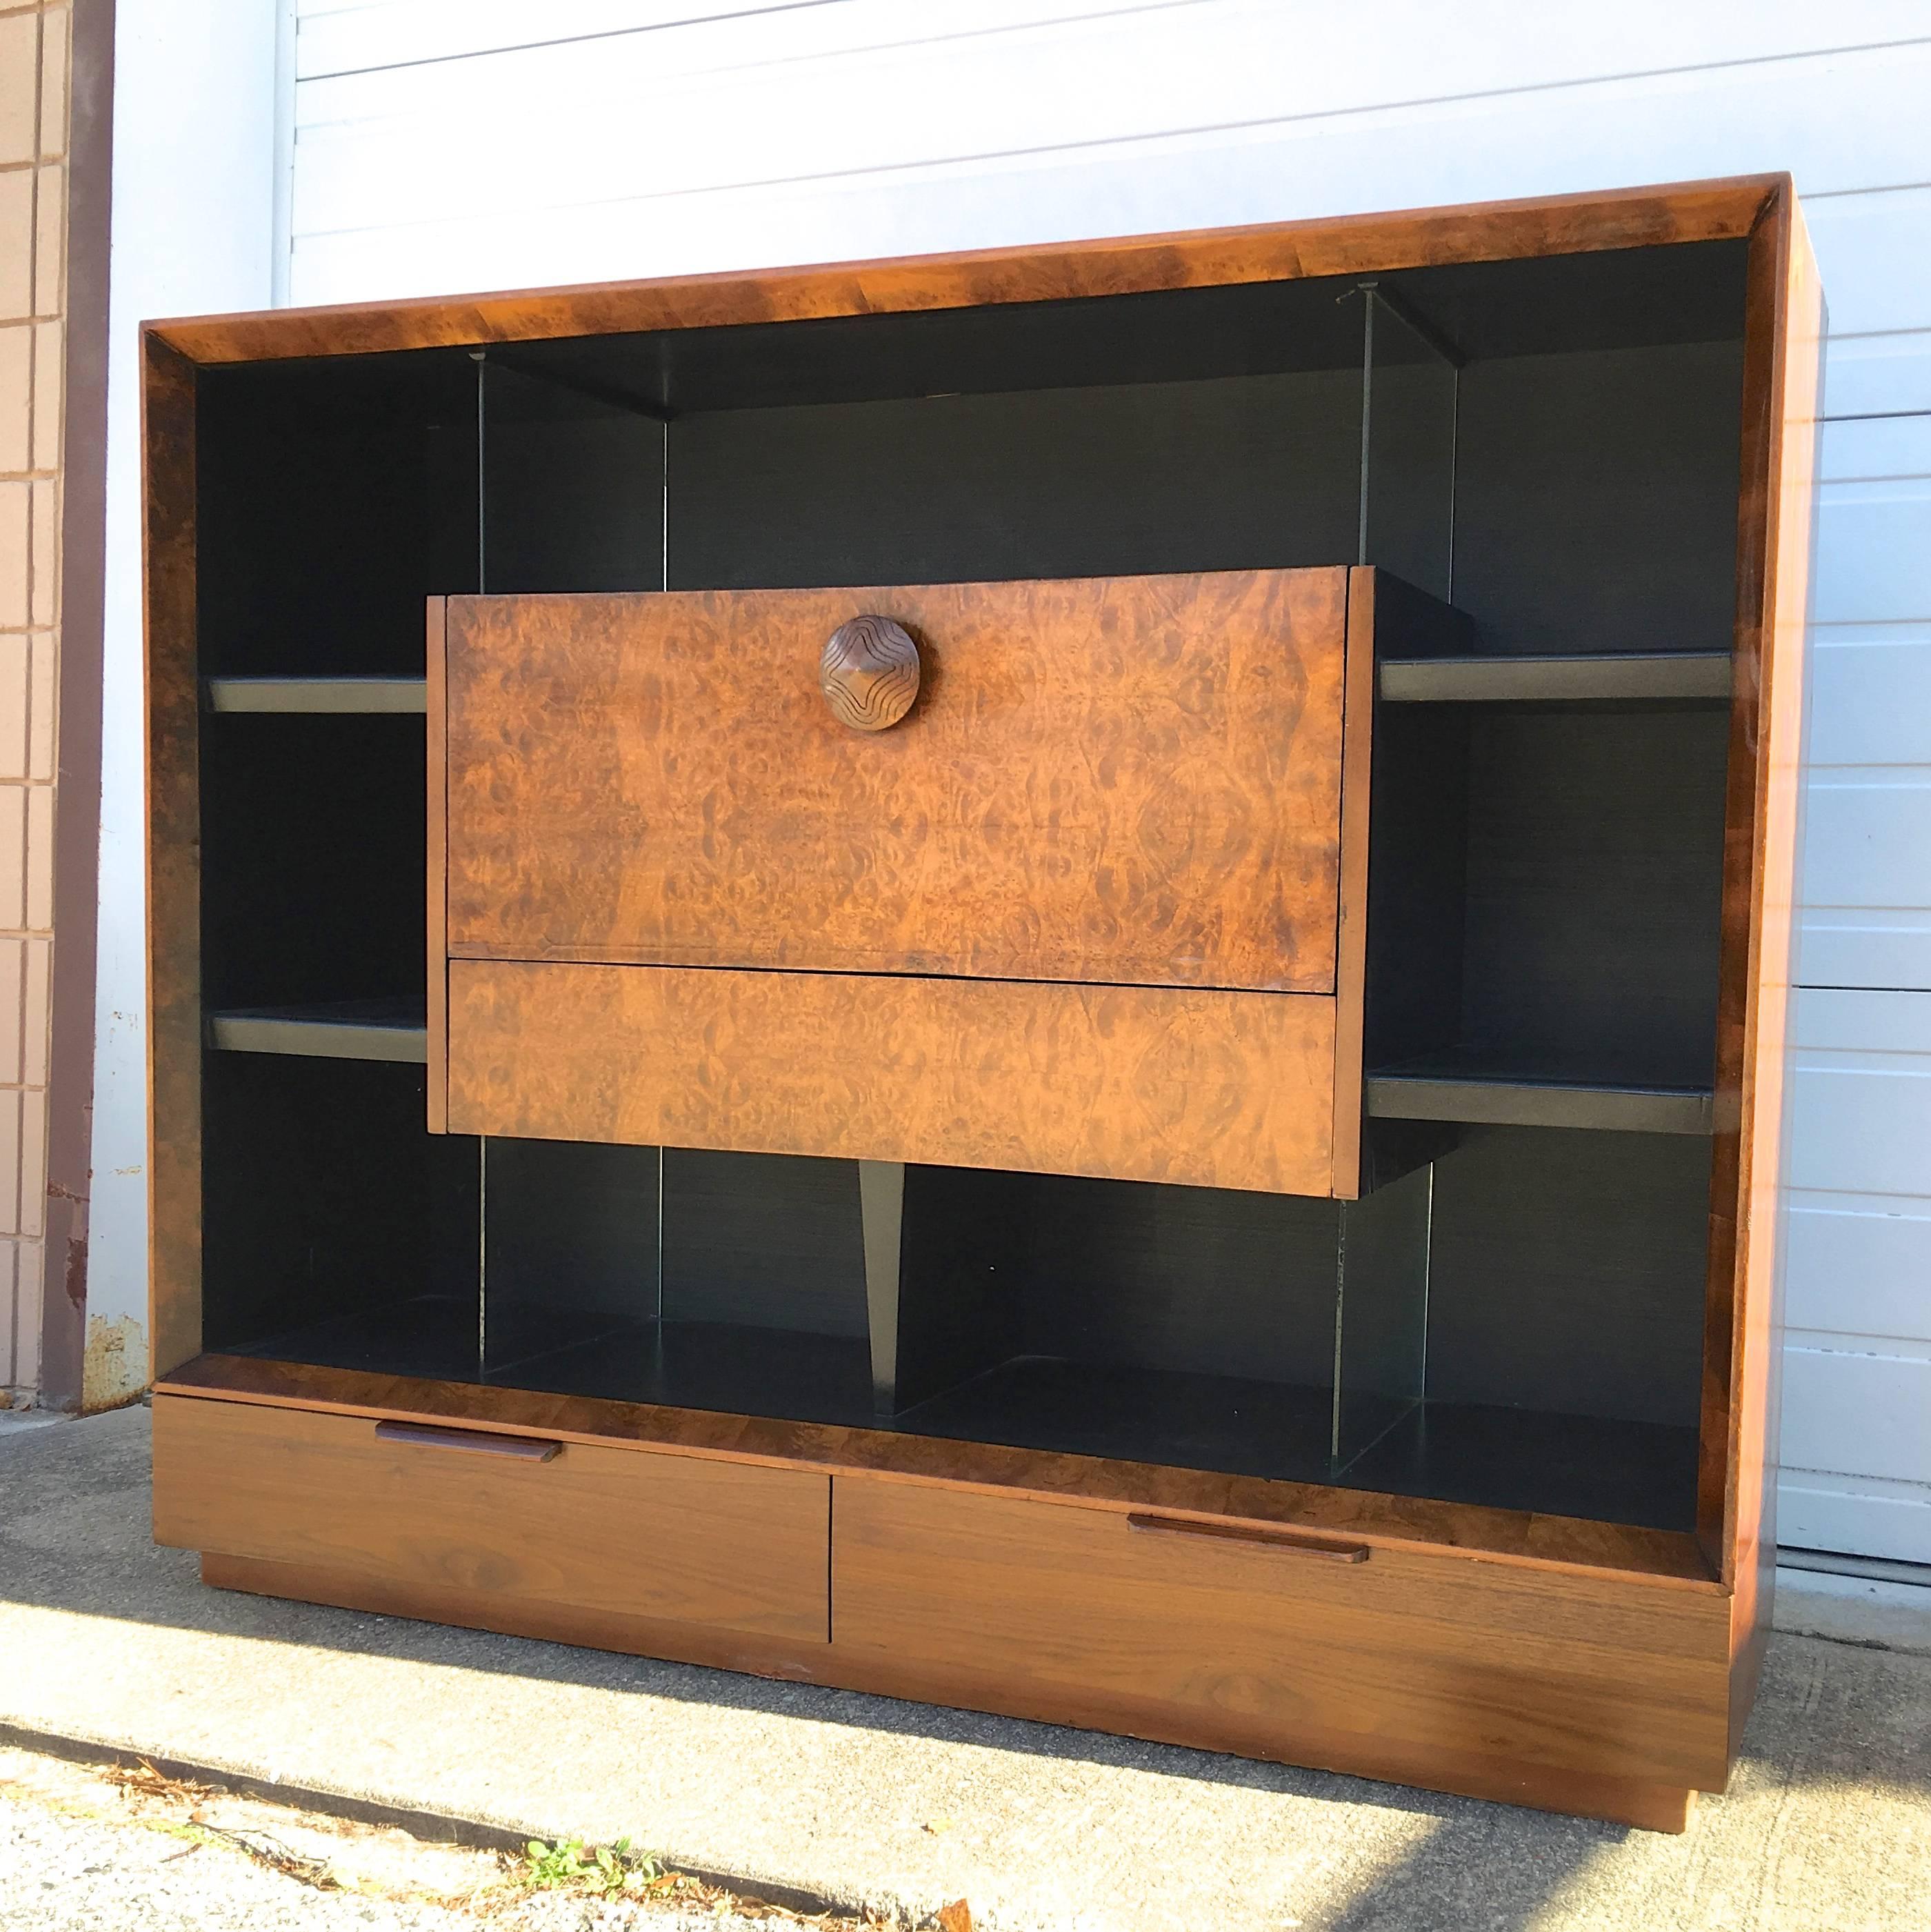 Gilbert Rohde large-scale bookcase with drop-front secretary desk and storage drawers in exotic burl paldao wood from his 1941 Paldao Collection for Herman Miller. 

Rohde's collaboration with Herman Miller (from 1932 until his death in 1944) is